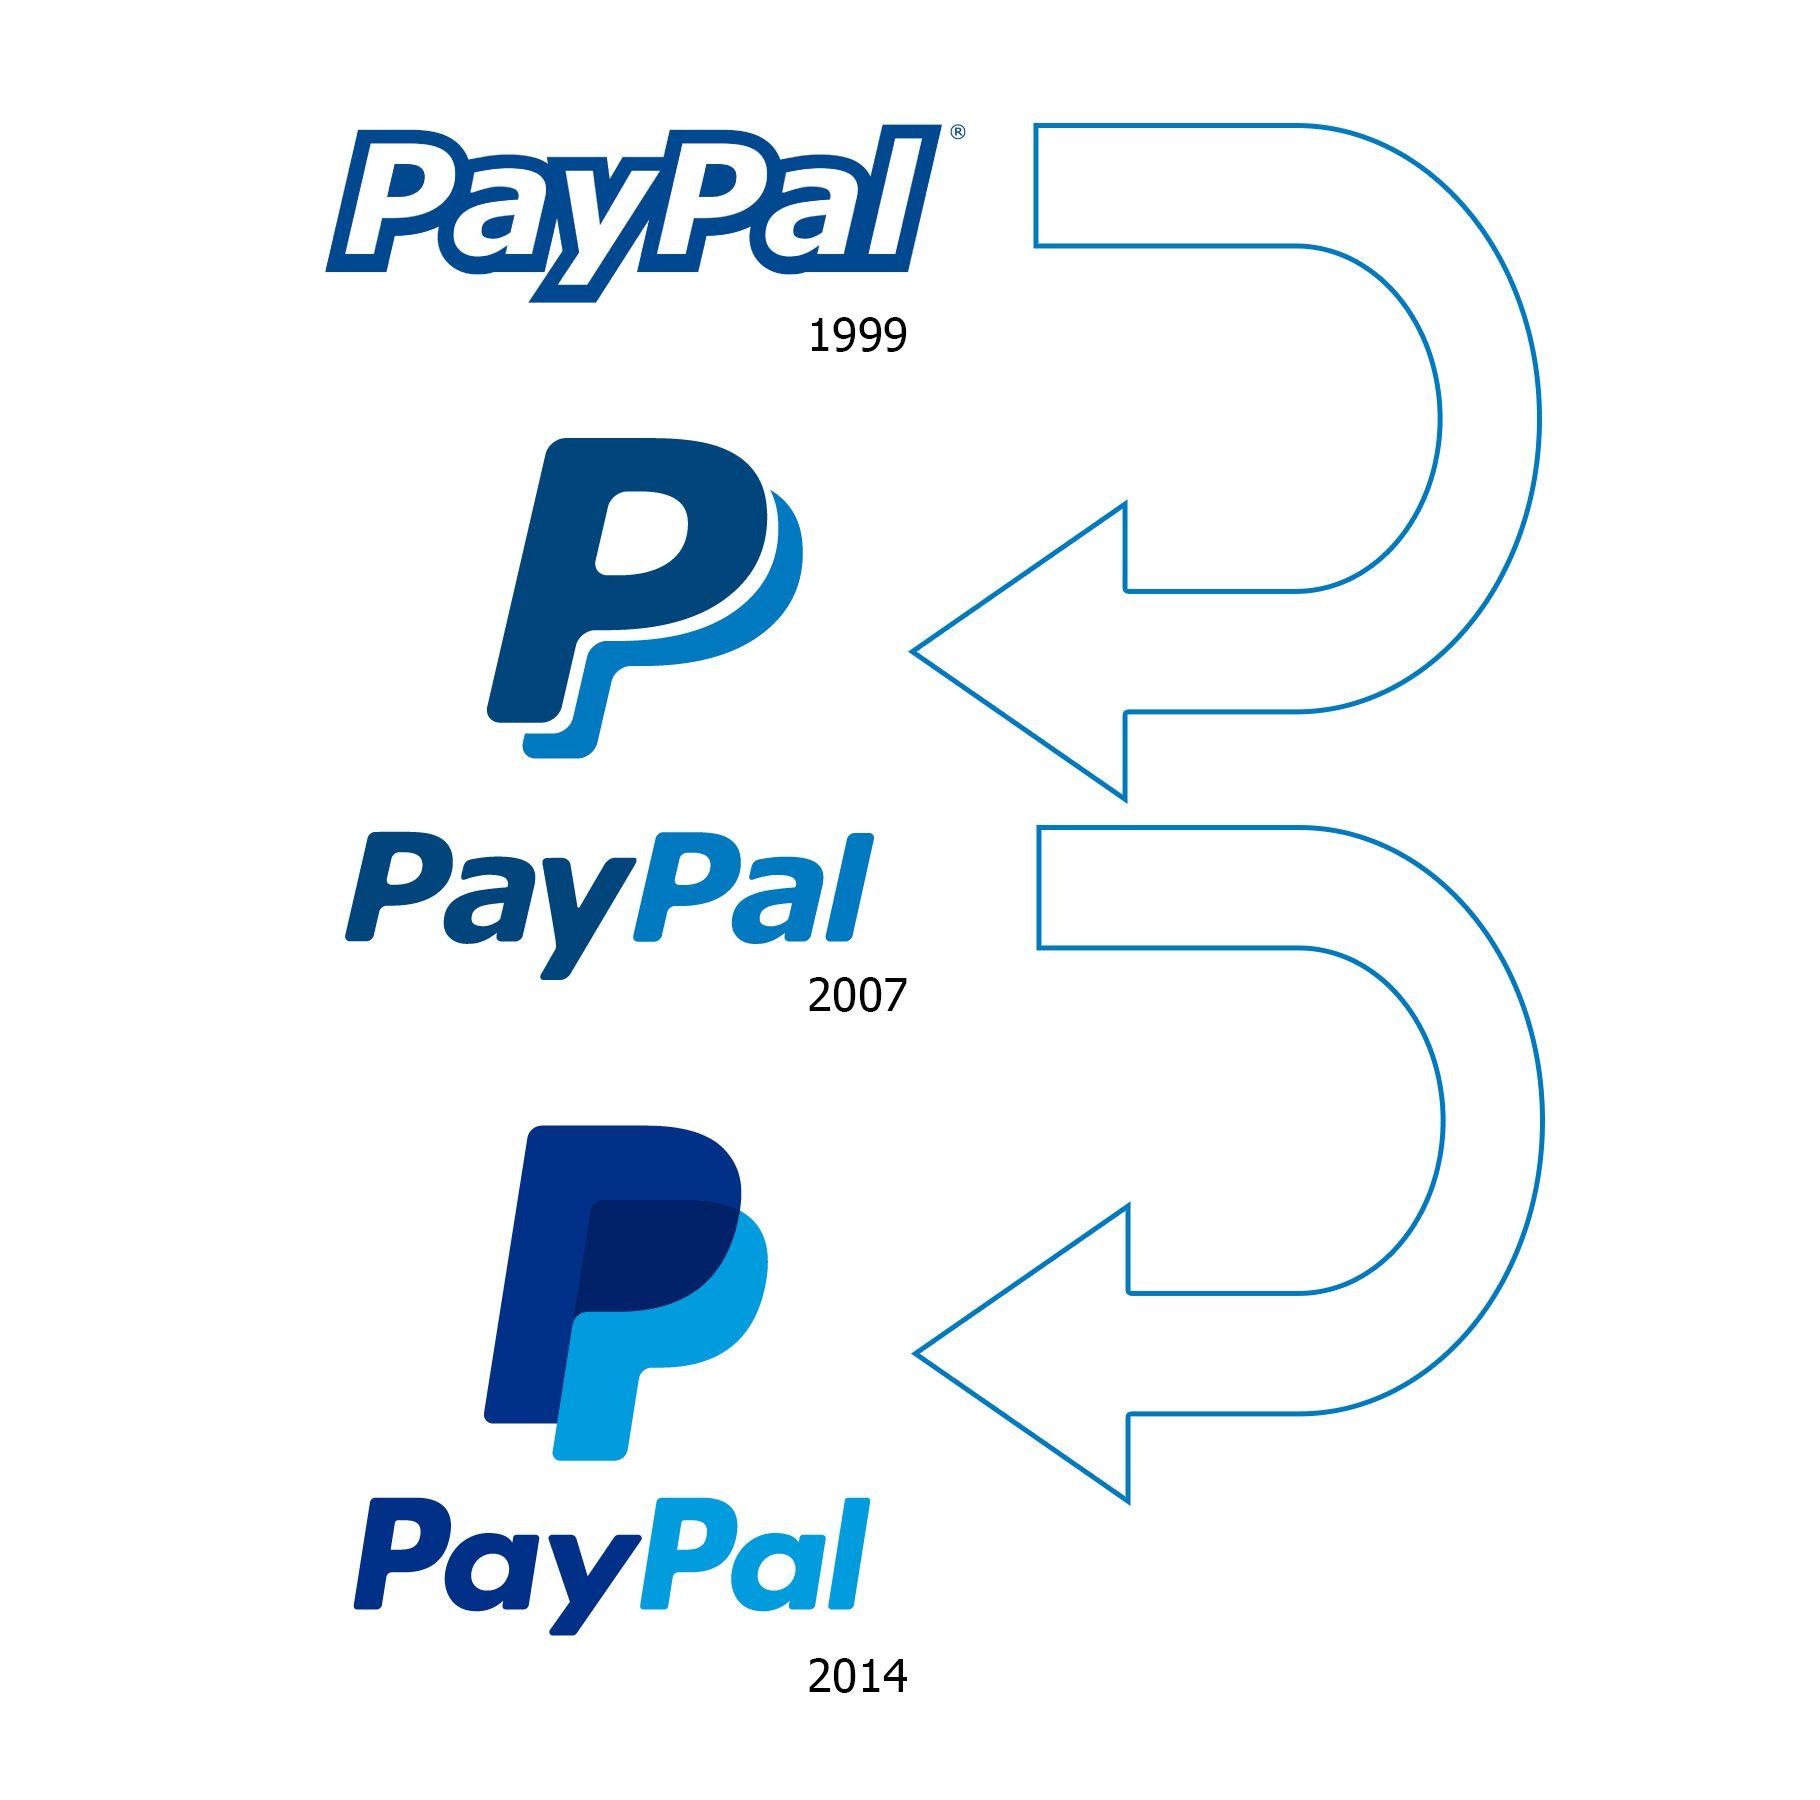 PayPal Logo - Paypal Logo, Paypal Symbol, Meaning, History and Evolution